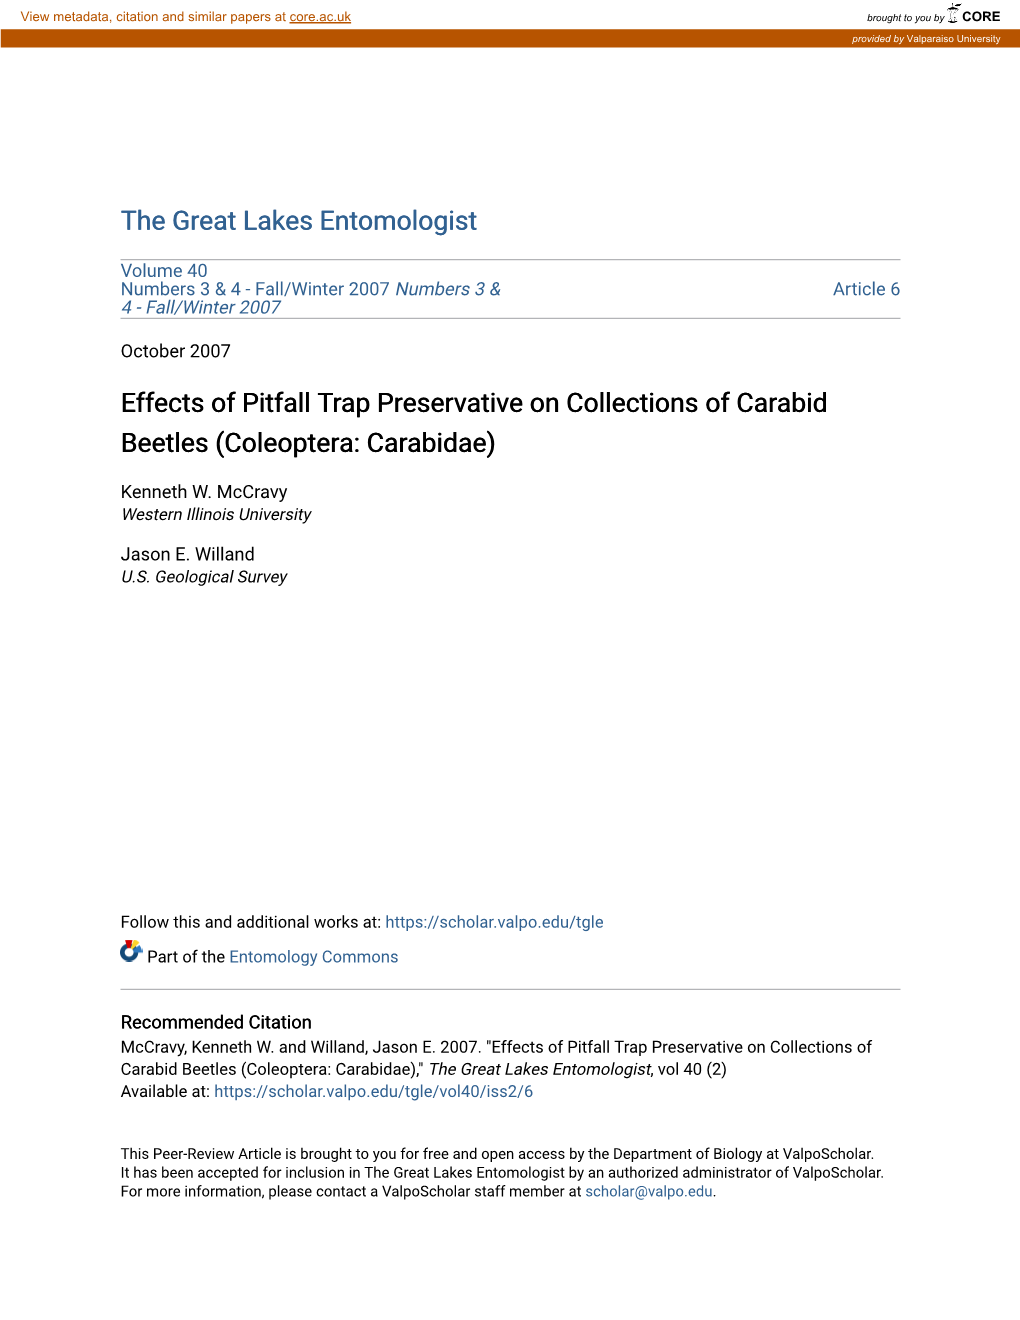 Effects of Pitfall Trap Preservative on Collections of Carabid Beetles (Coleoptera: Carabidae)